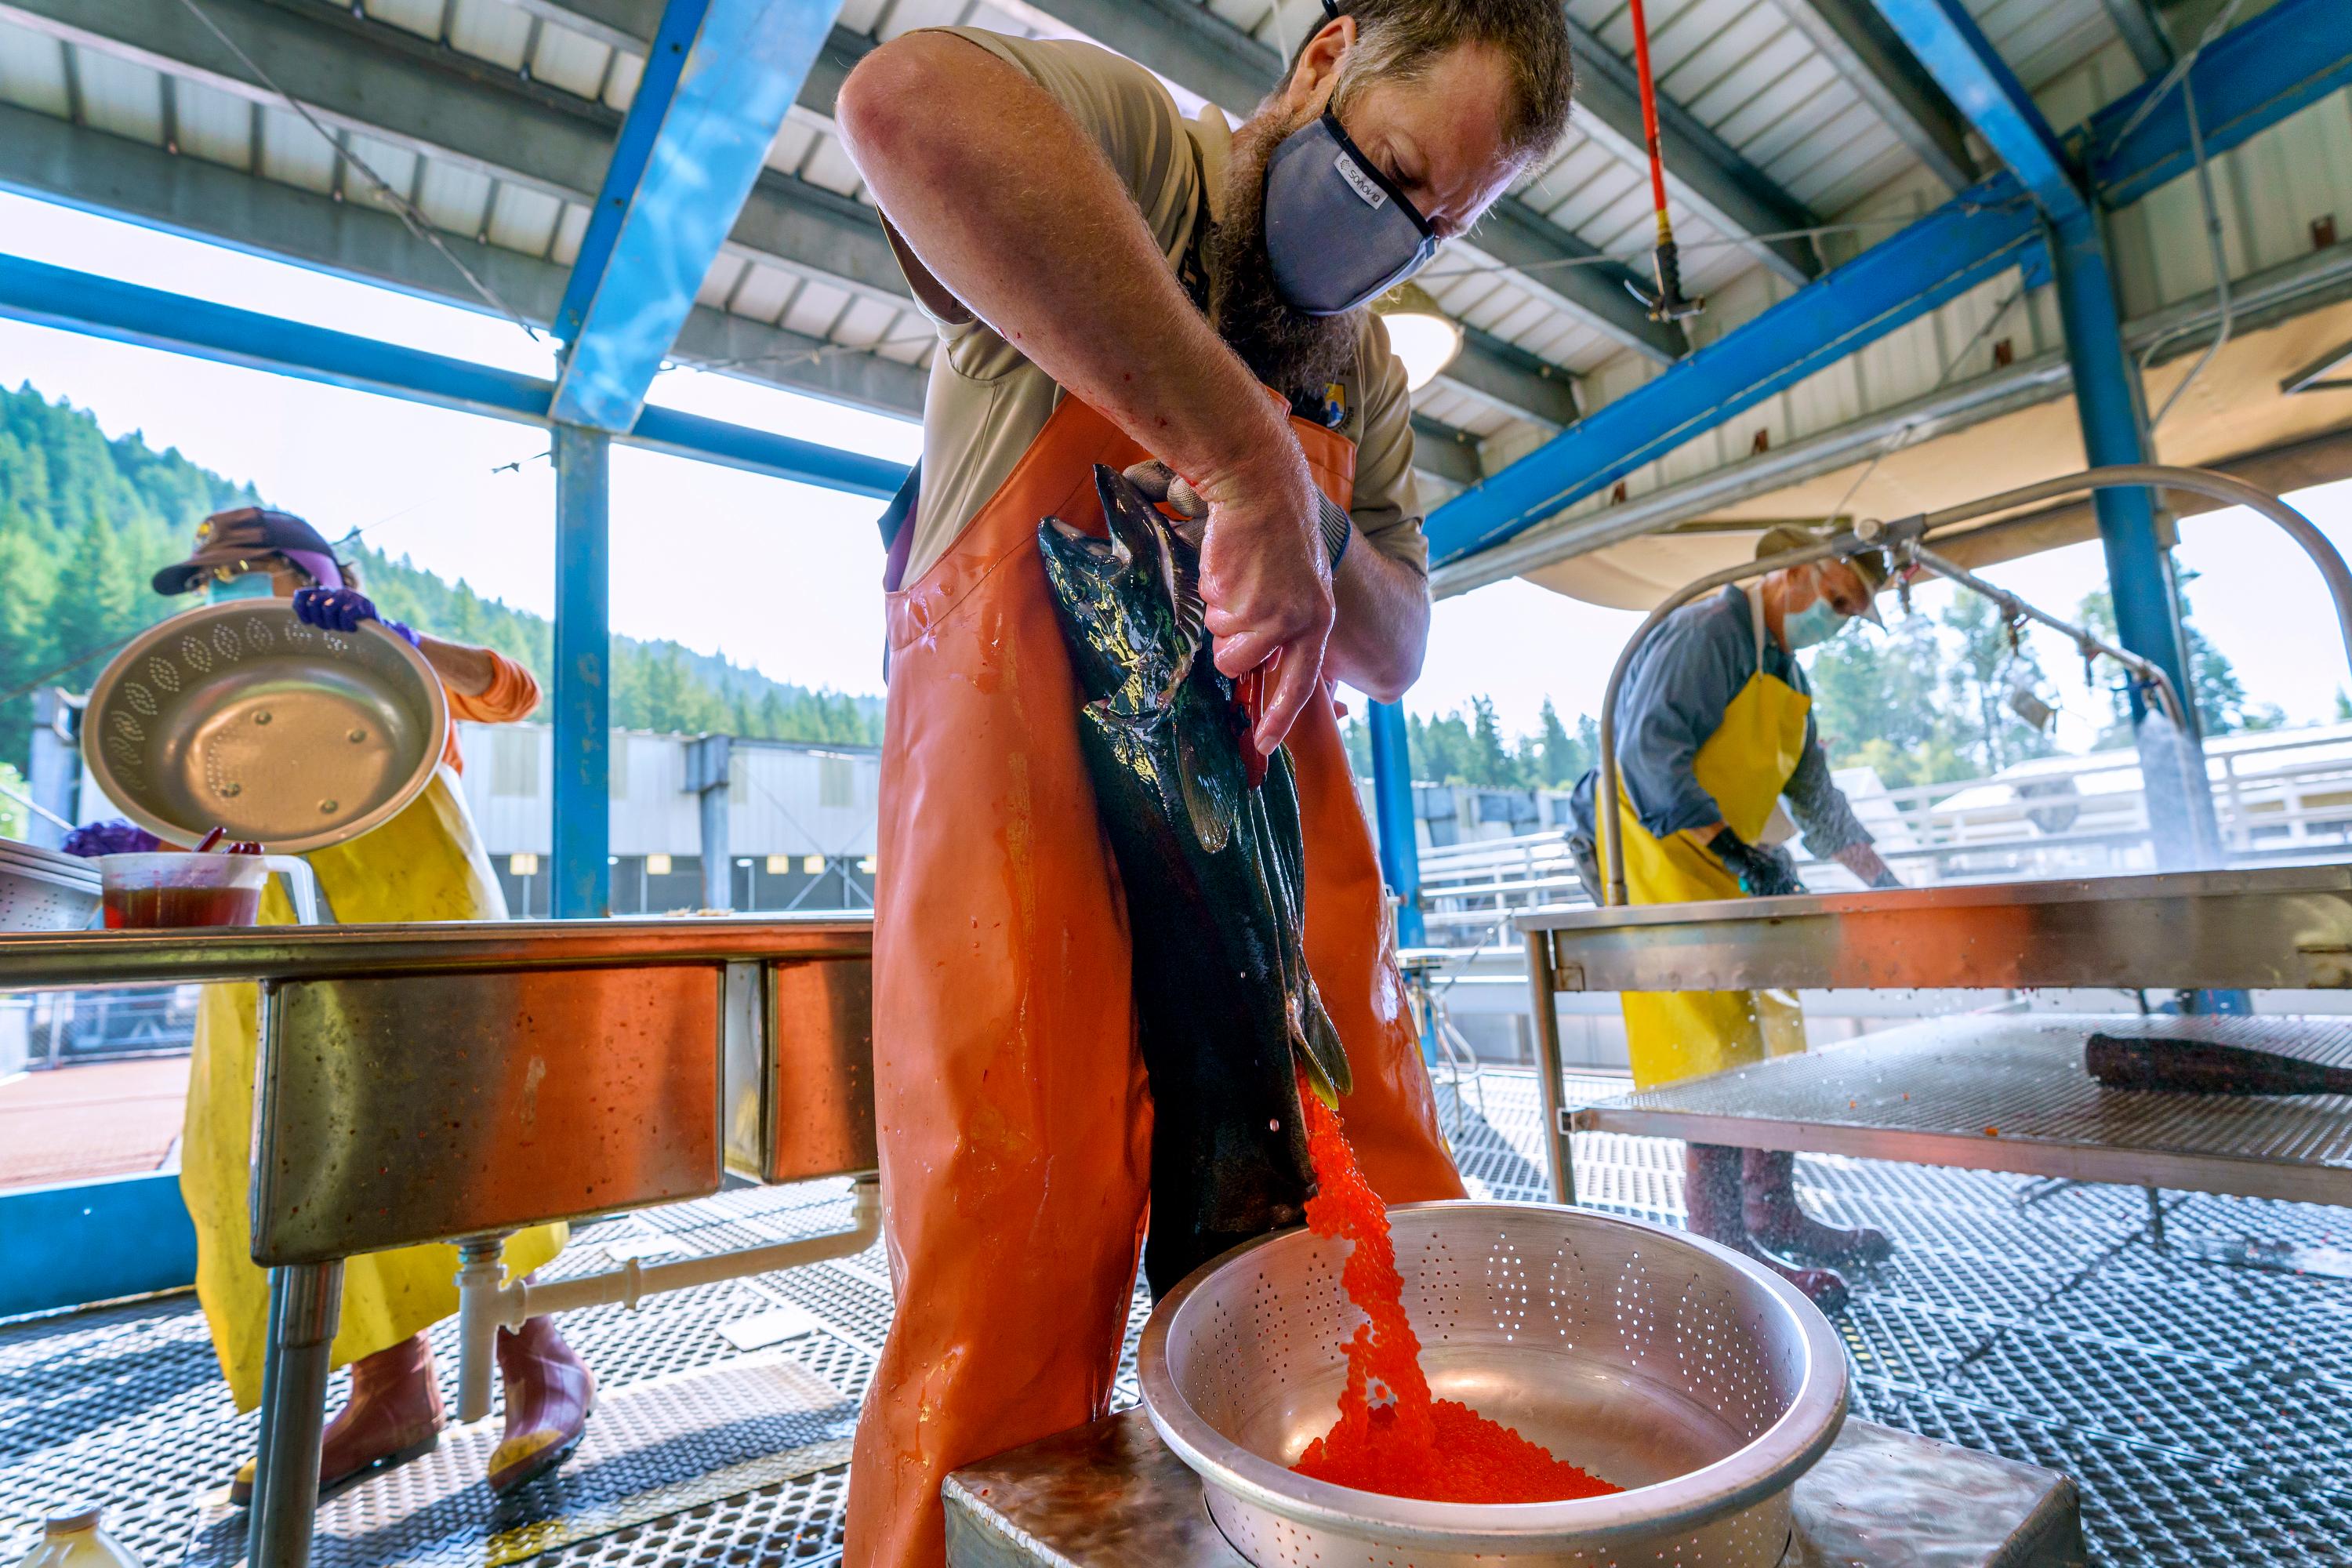 A man in an orange waterproof apron splits a salmon open emptying its sack of dozens of small red eggs